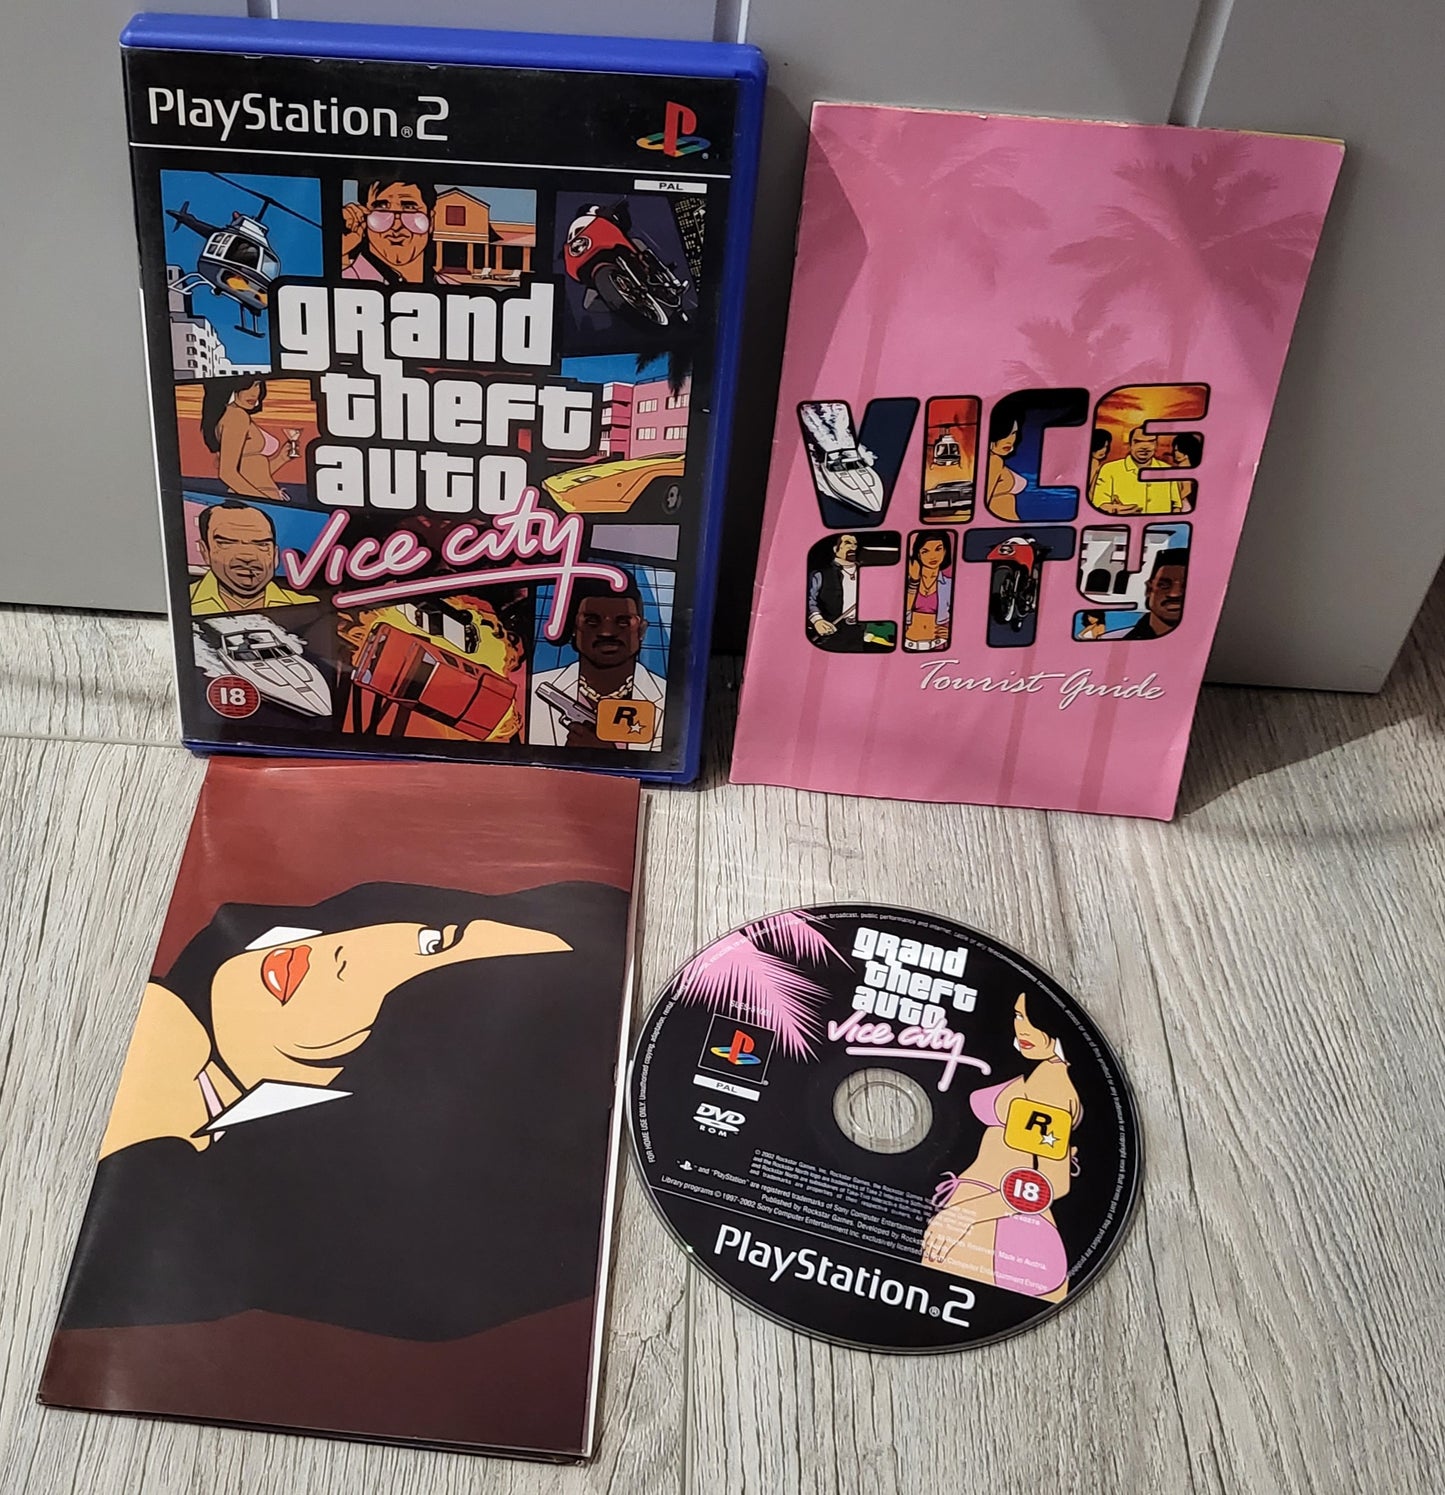 Grand Theft Auto Vice City Black Label with Map Sony Playstation 2 (PS2) Game